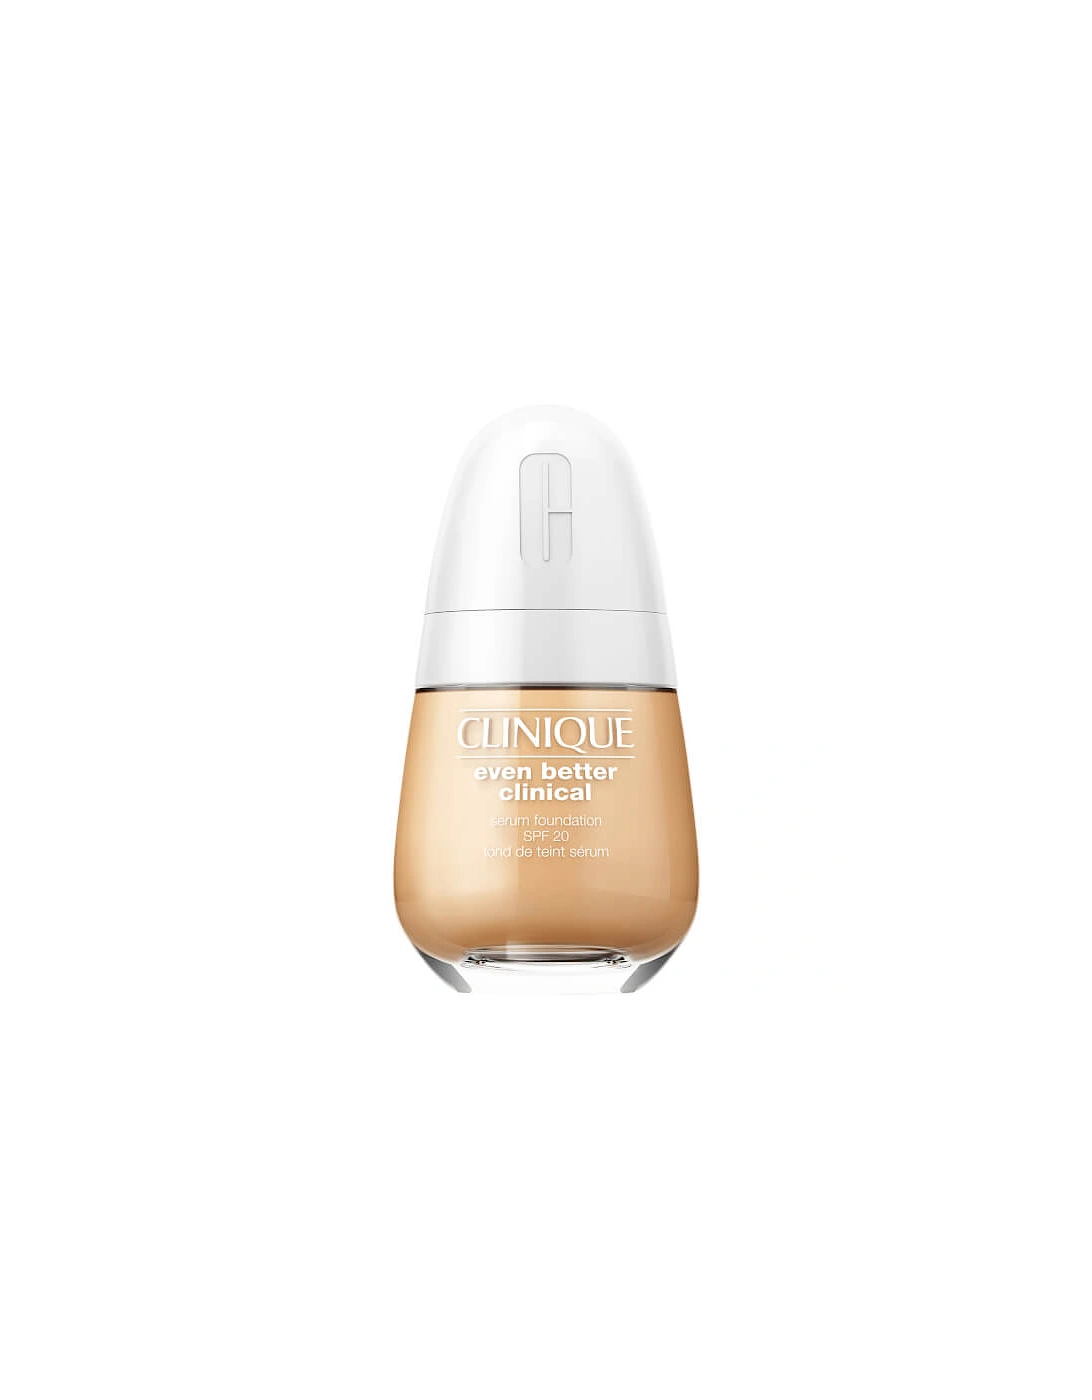 Even Better Clinical Serum Foundation SPF20 - Toasted Wheat, 2 of 1